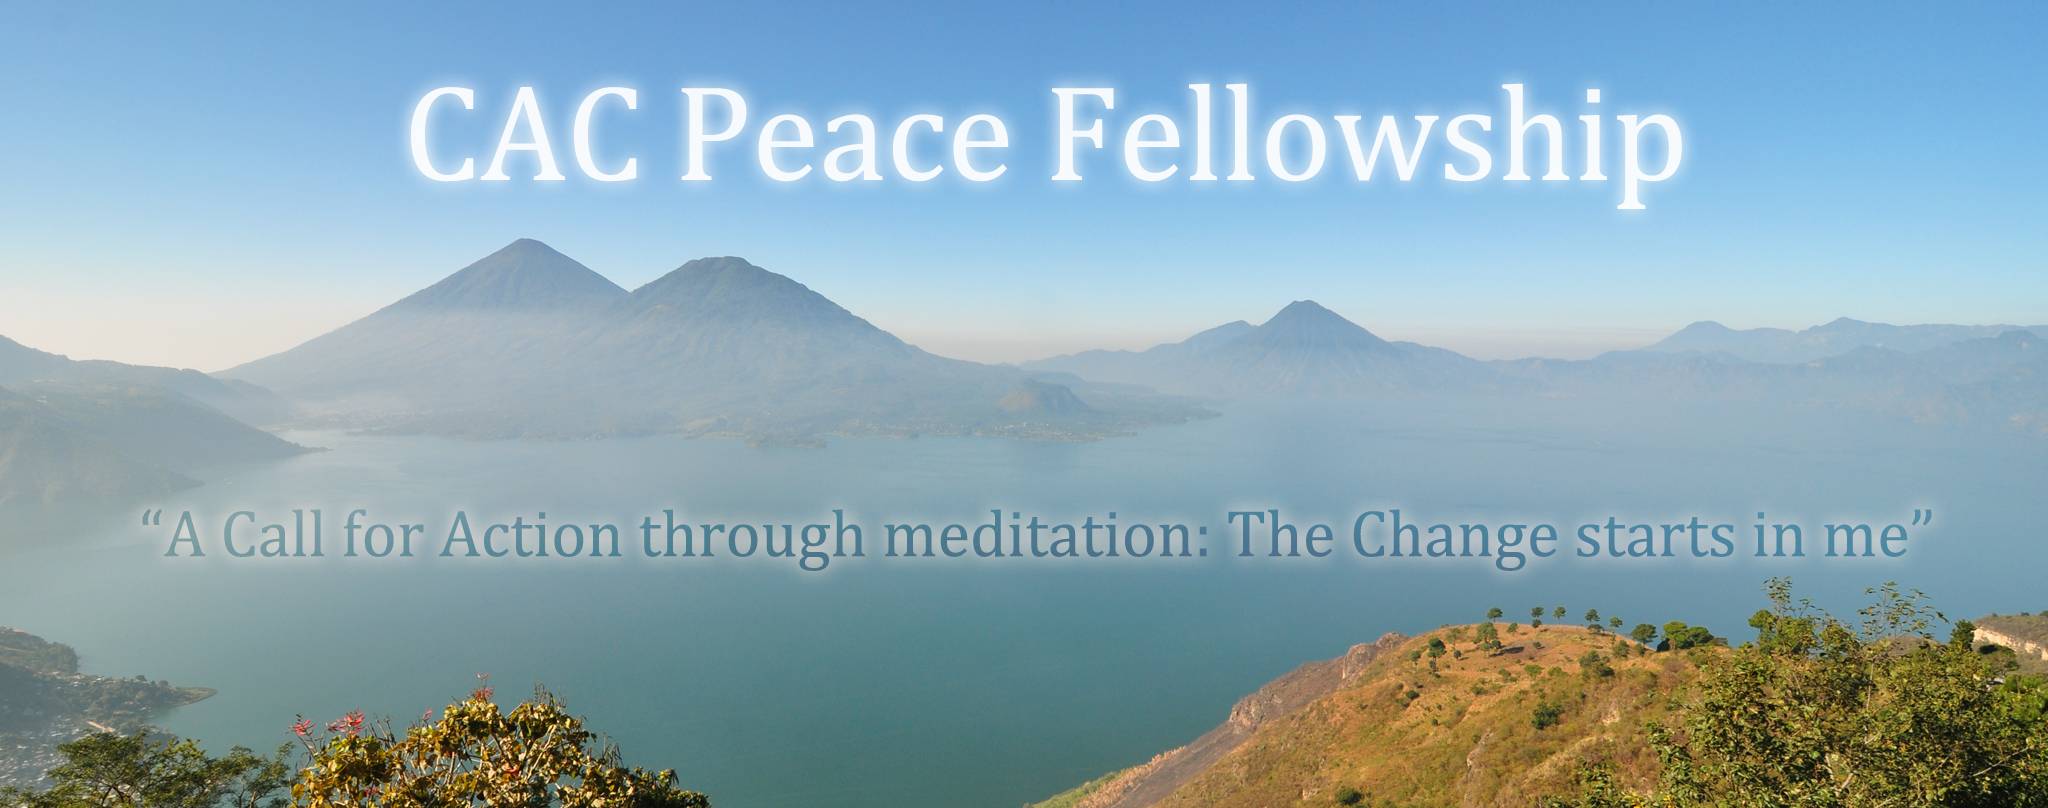 Central America & the Caribbean (CAC)  Peace for Youth Fellowship 2015 - Guatemala